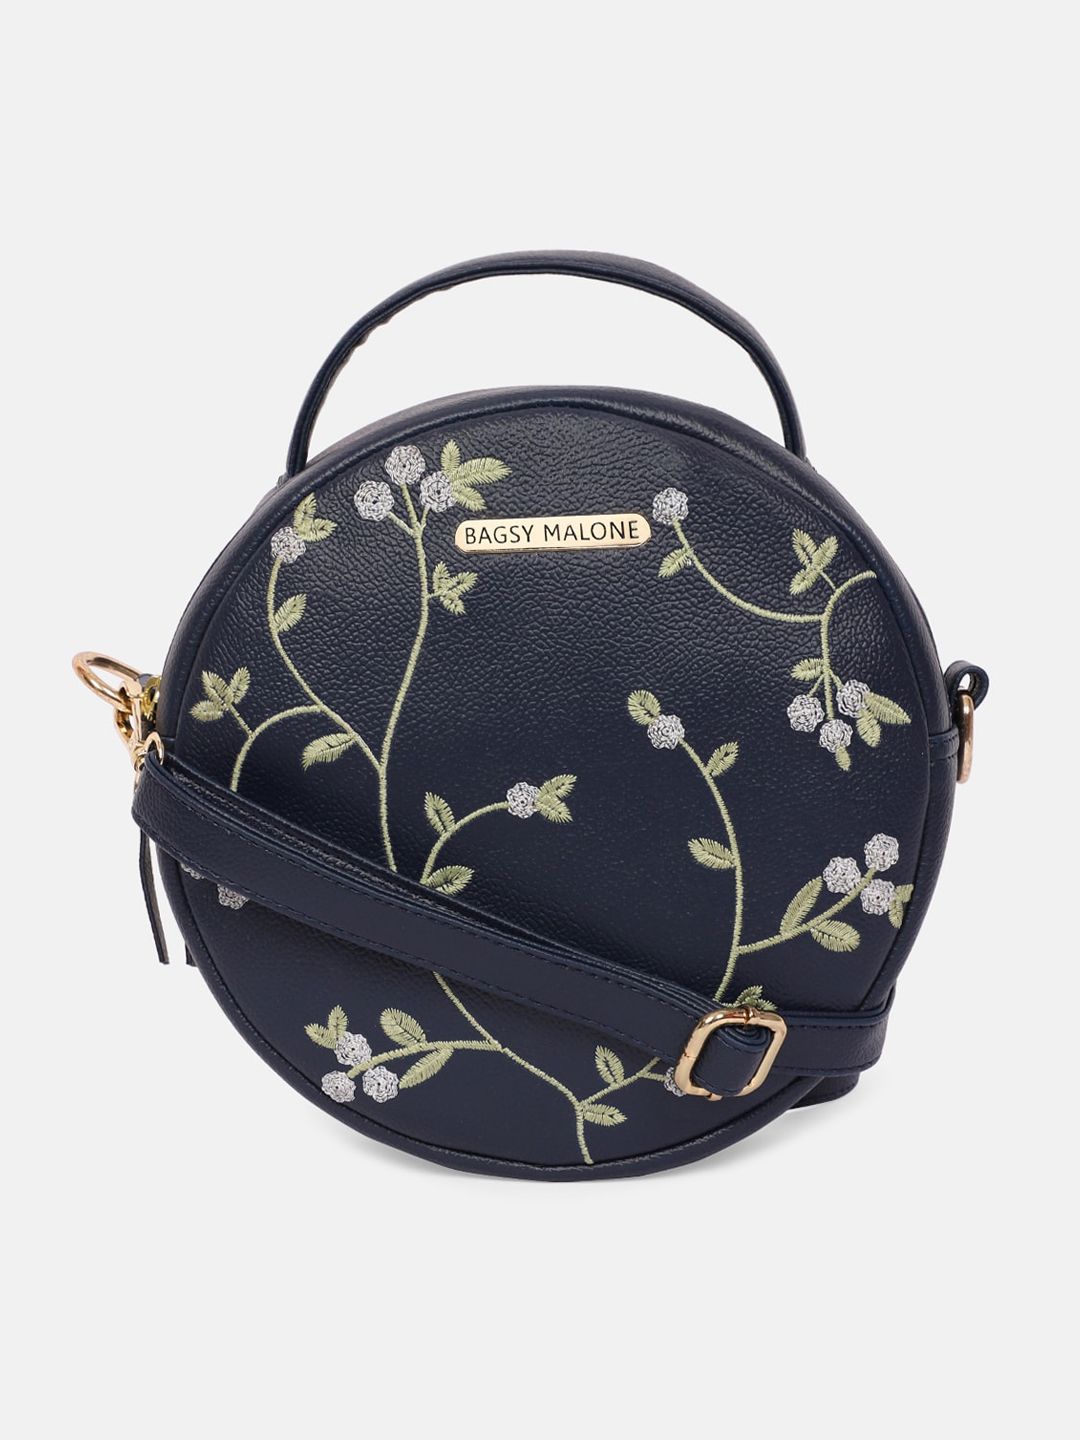 Bagsy Malone Blue Floral PU Half Moon Sling Bag Price in India